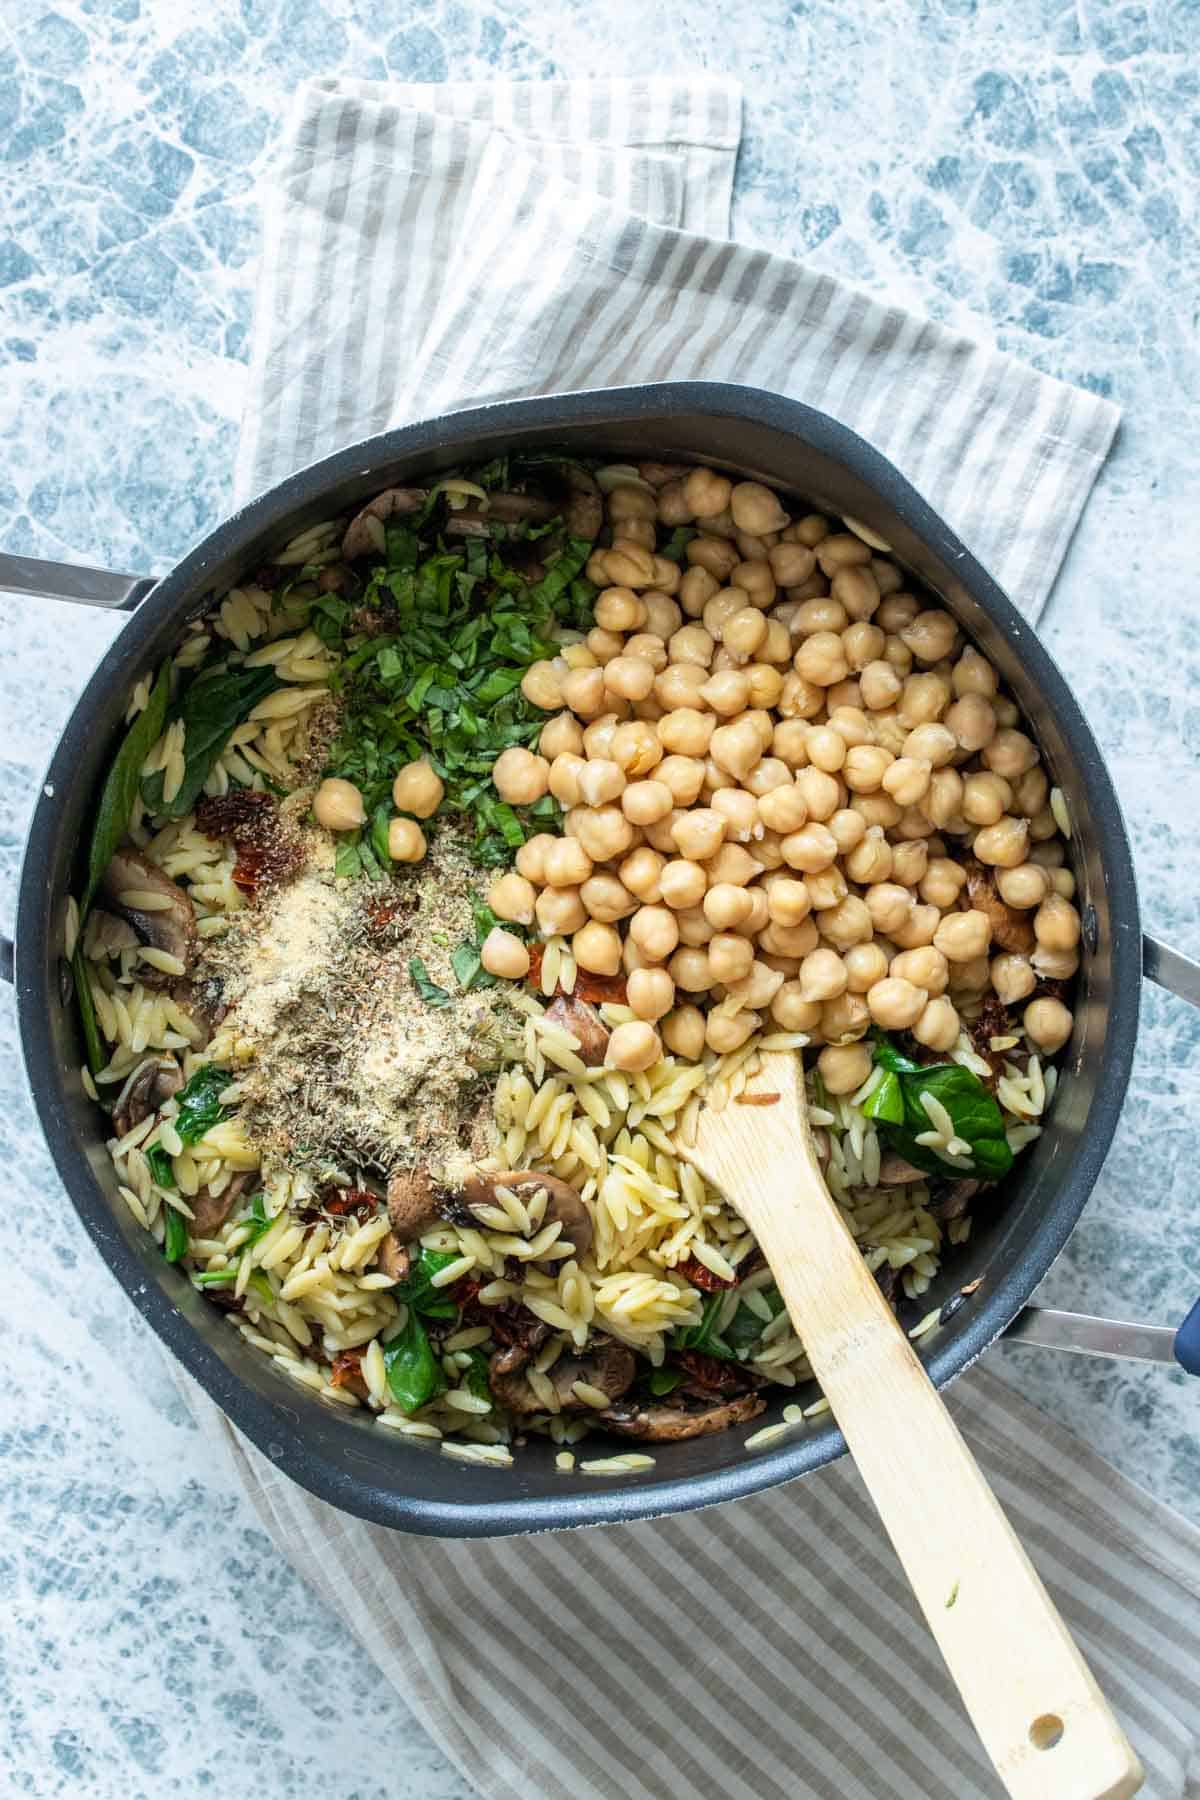 A wooden spoon mixing orzo, vegetables, herbs and chickpeas in a pot